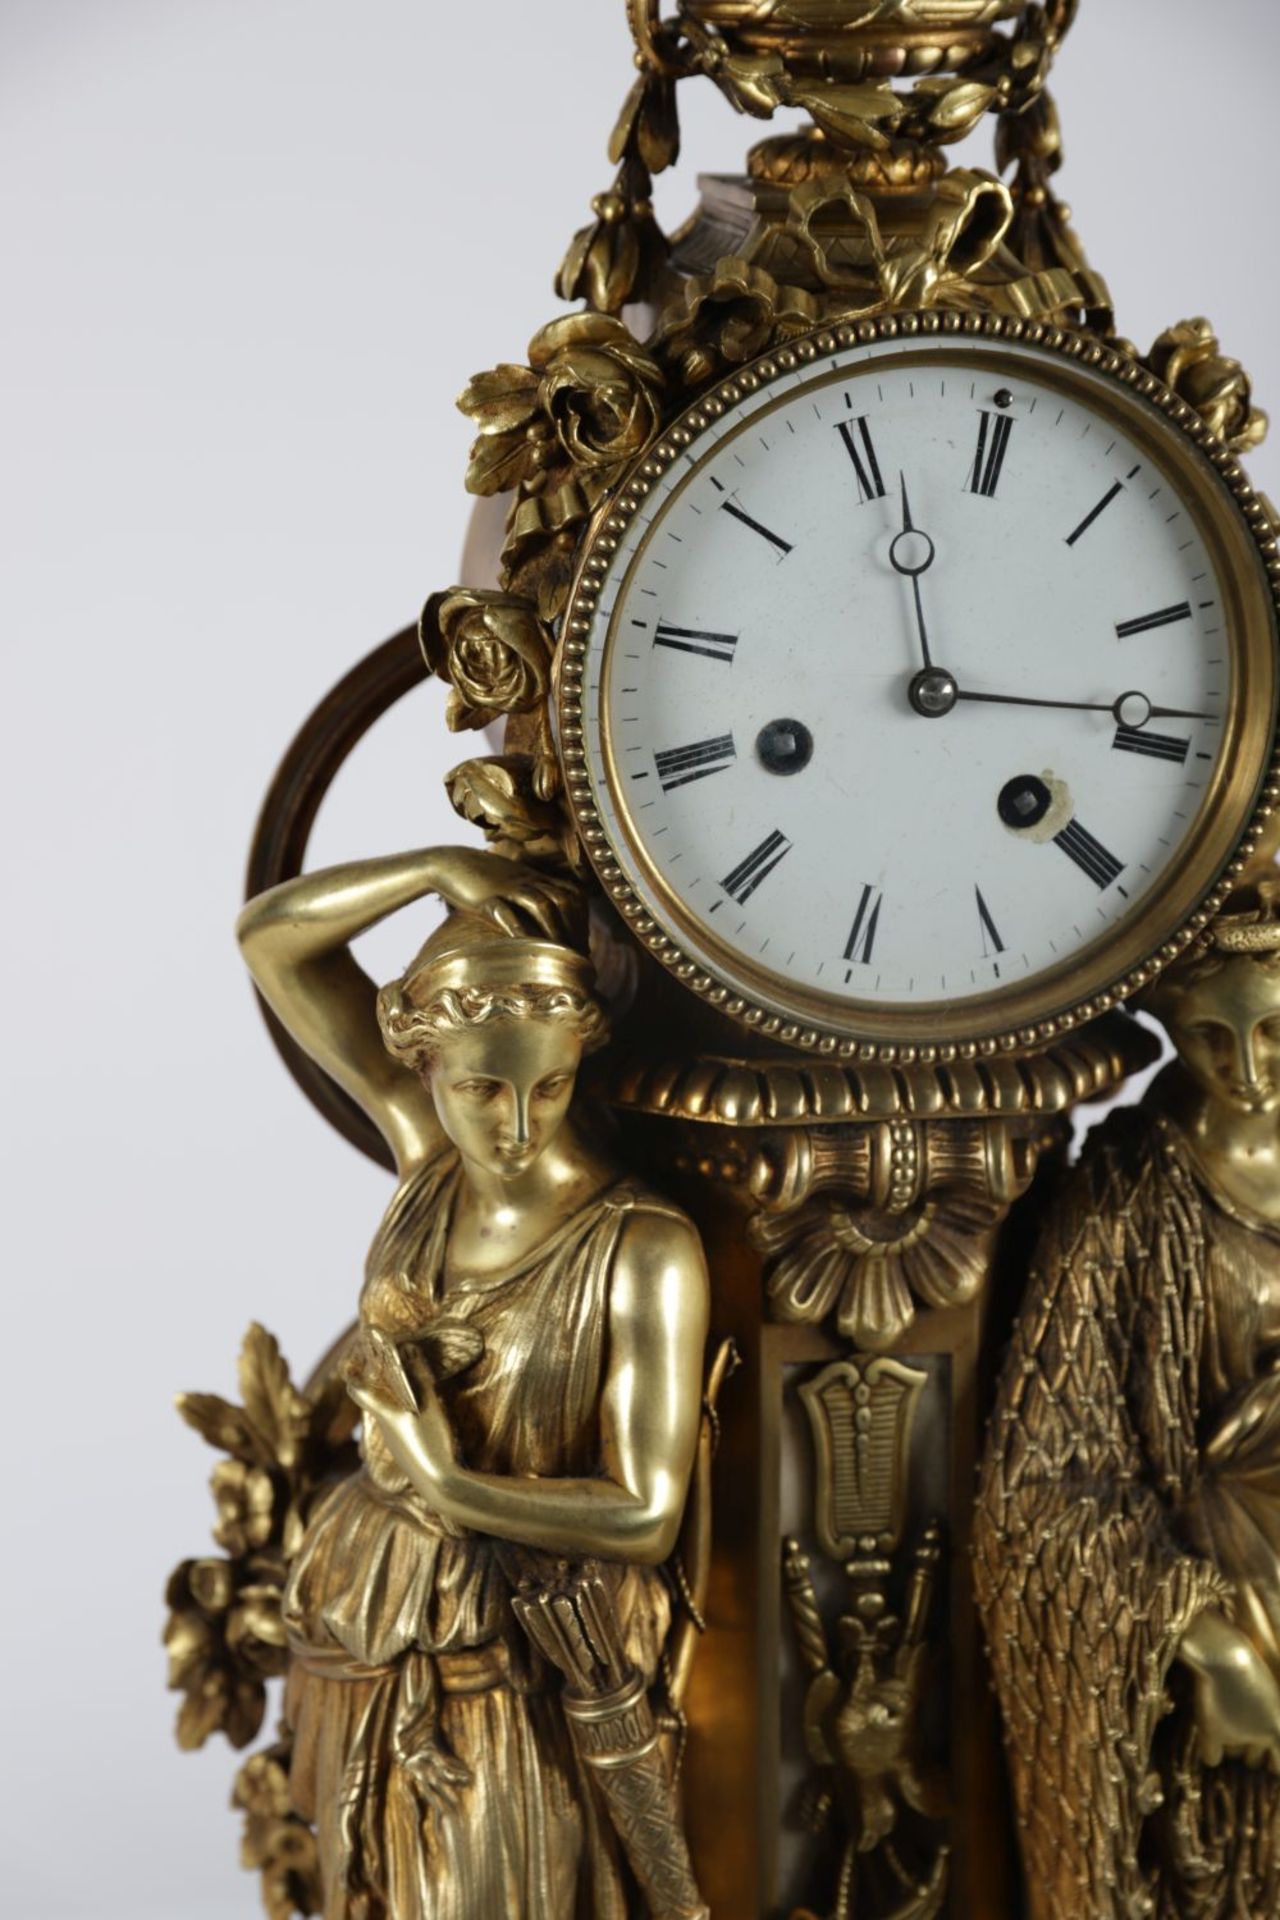 19TH-CENTURY FRENCH ORMOLU MARBLE CLOCK - Image 2 of 4